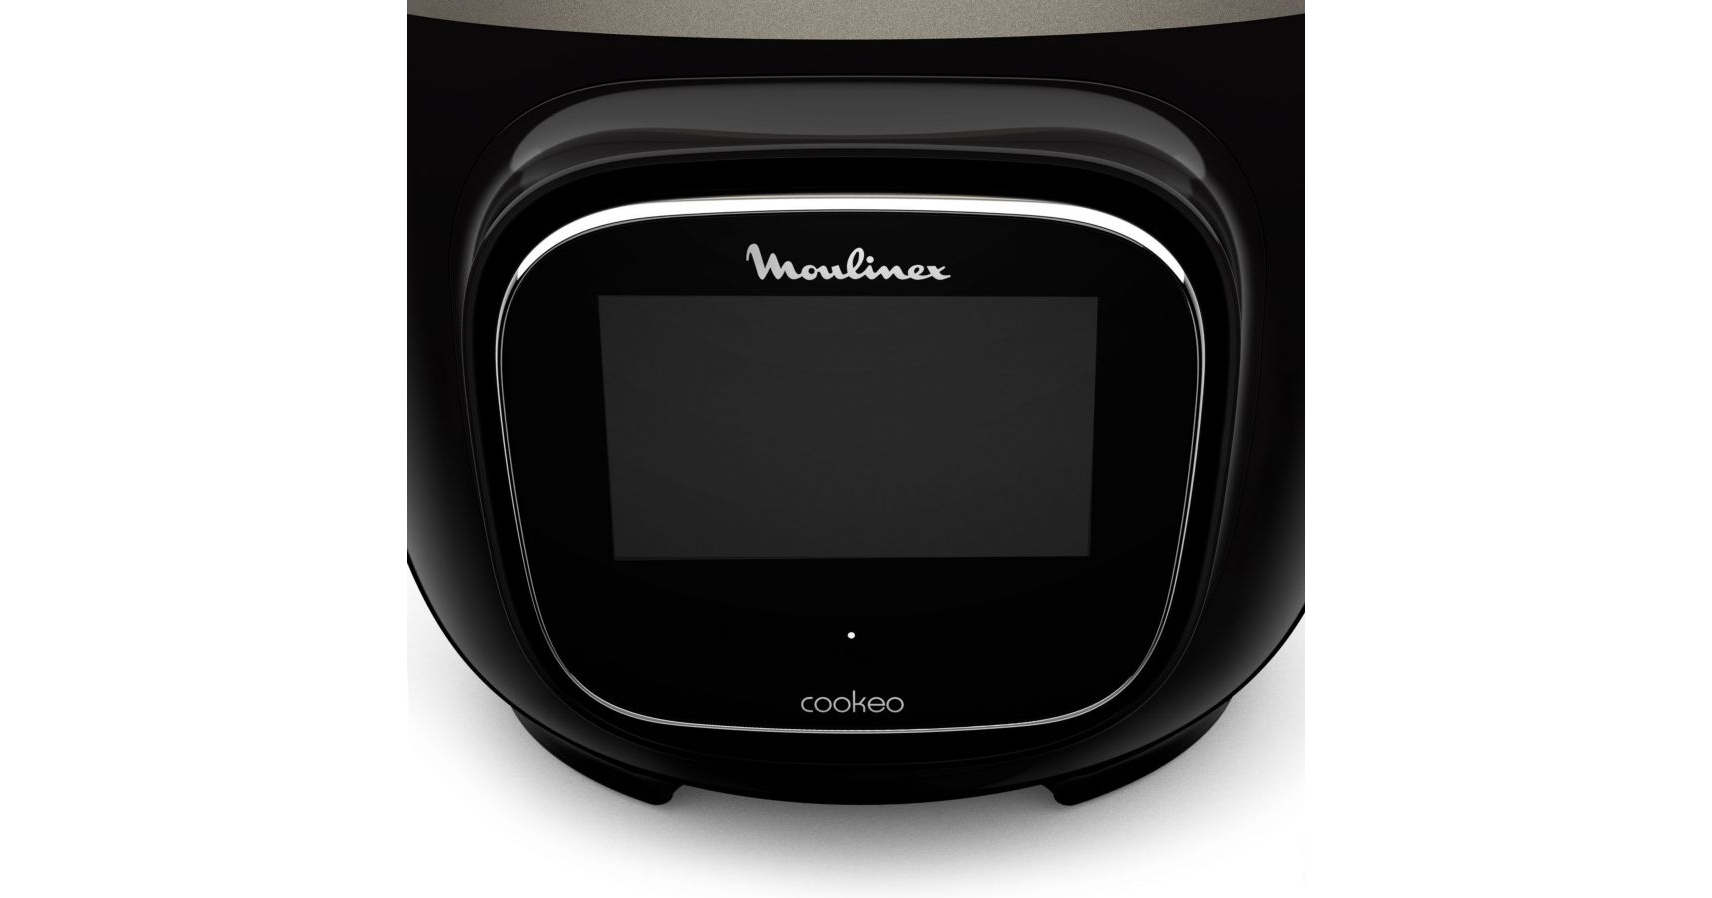 Robot cuiseur MOULINEX Cookeo touch Wifi - CE902800 - Tr